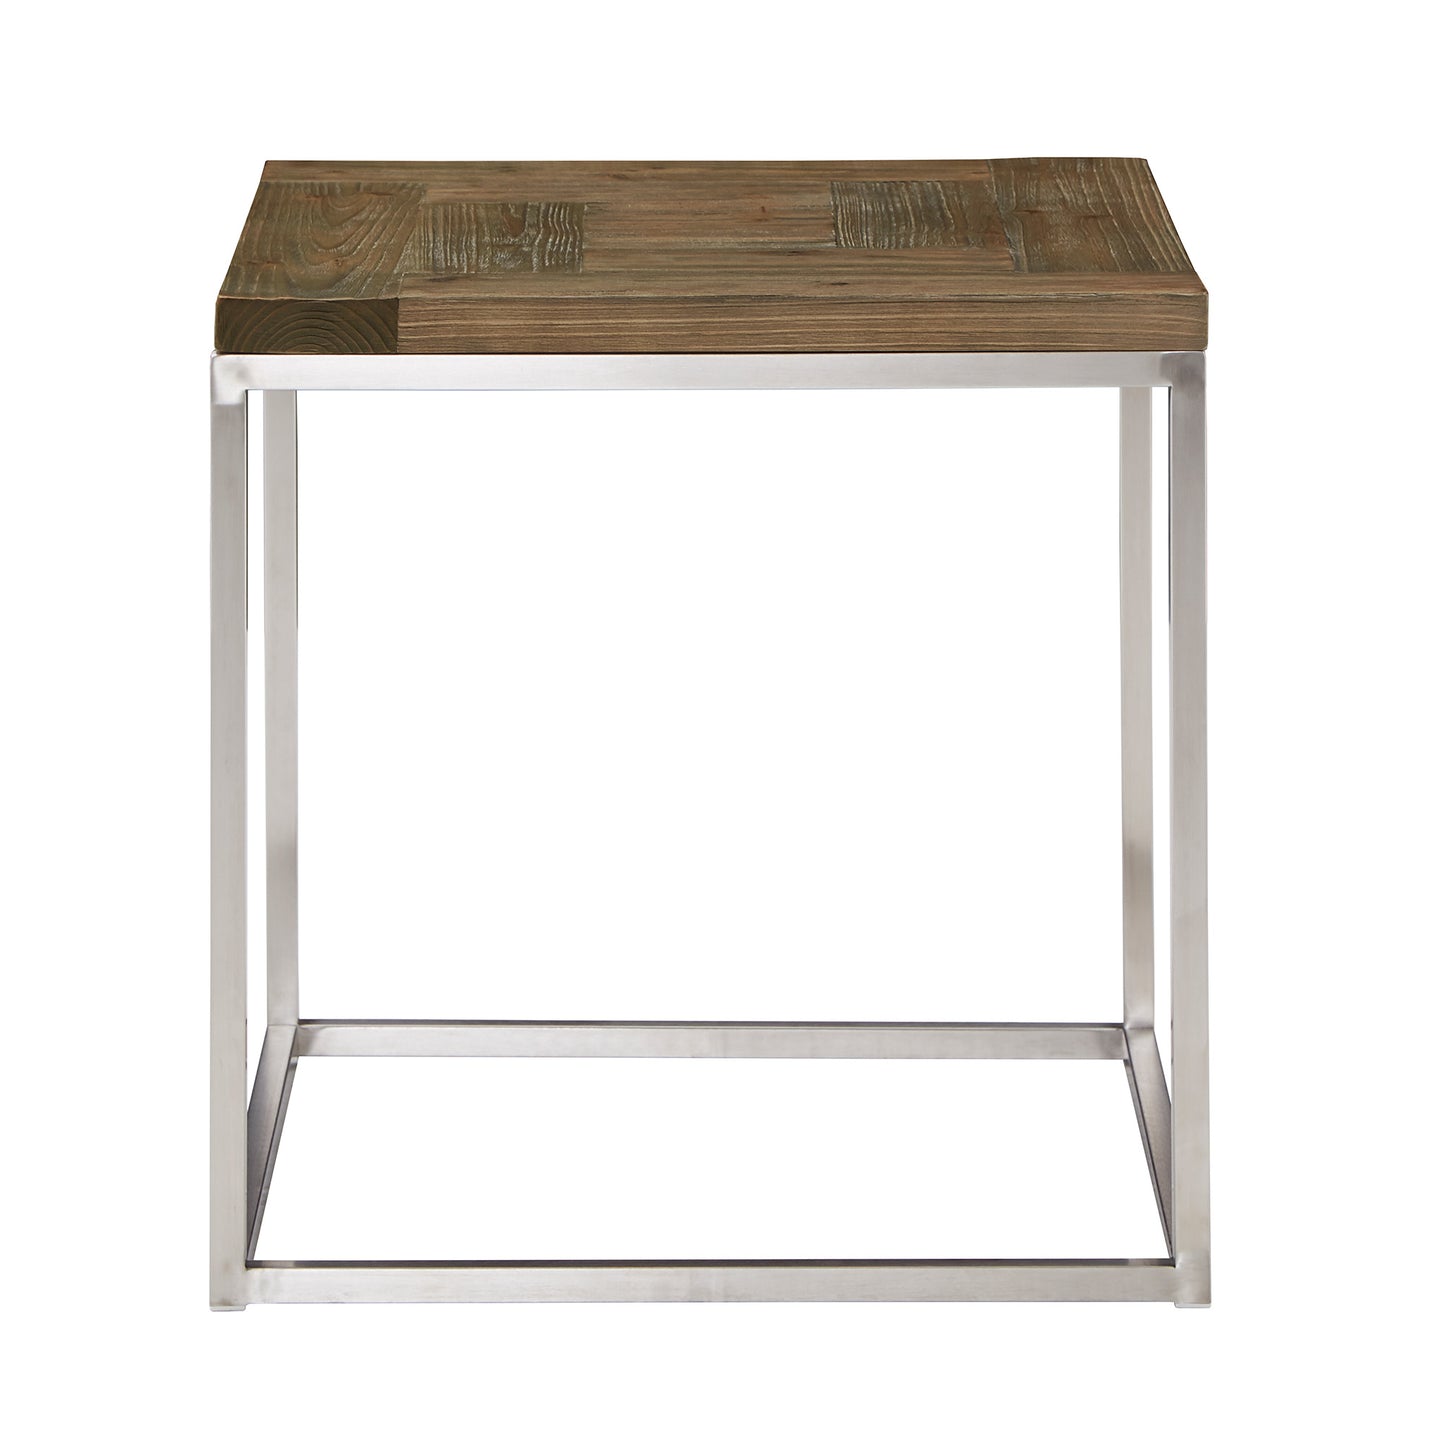 Stainless Steel Rectangular End Table - Light Pine Finish Top